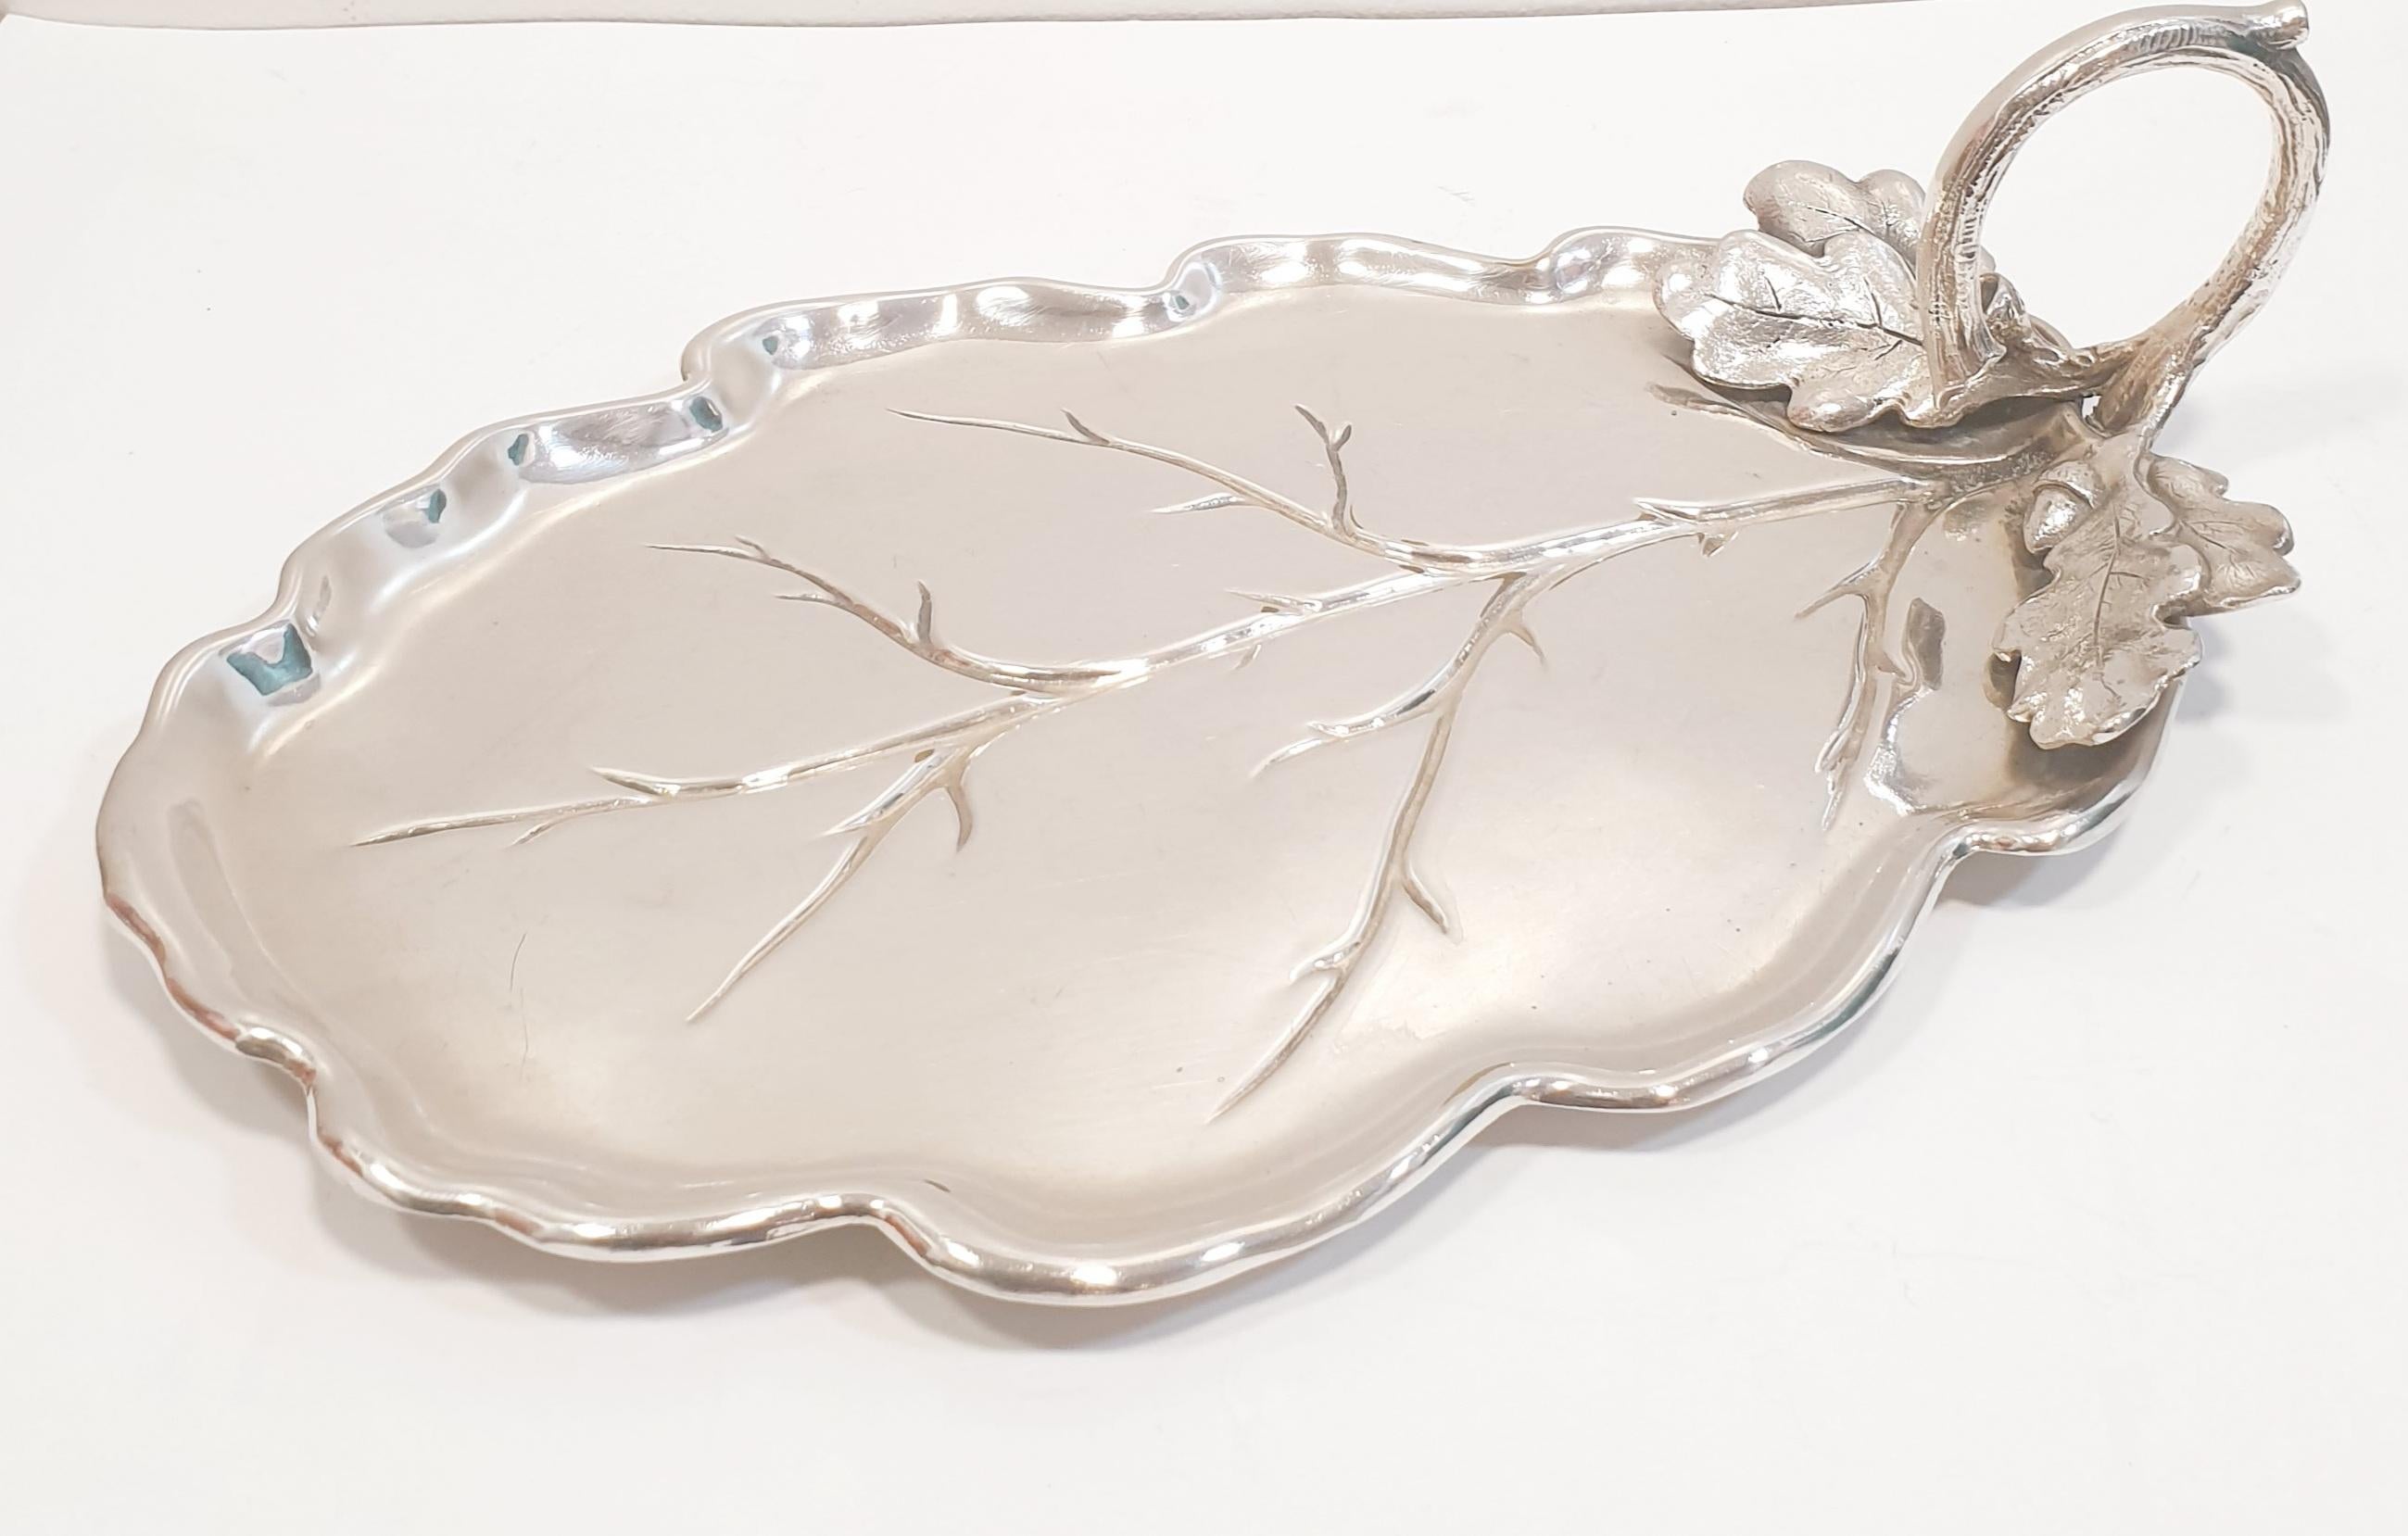 Antique silver tray from the 19th century. The tray simulates an oak leaf.

PRADERA is a second generation of a family run business jewelers of reference in Spain, with a rich track record being official distributers of prime European jewelry